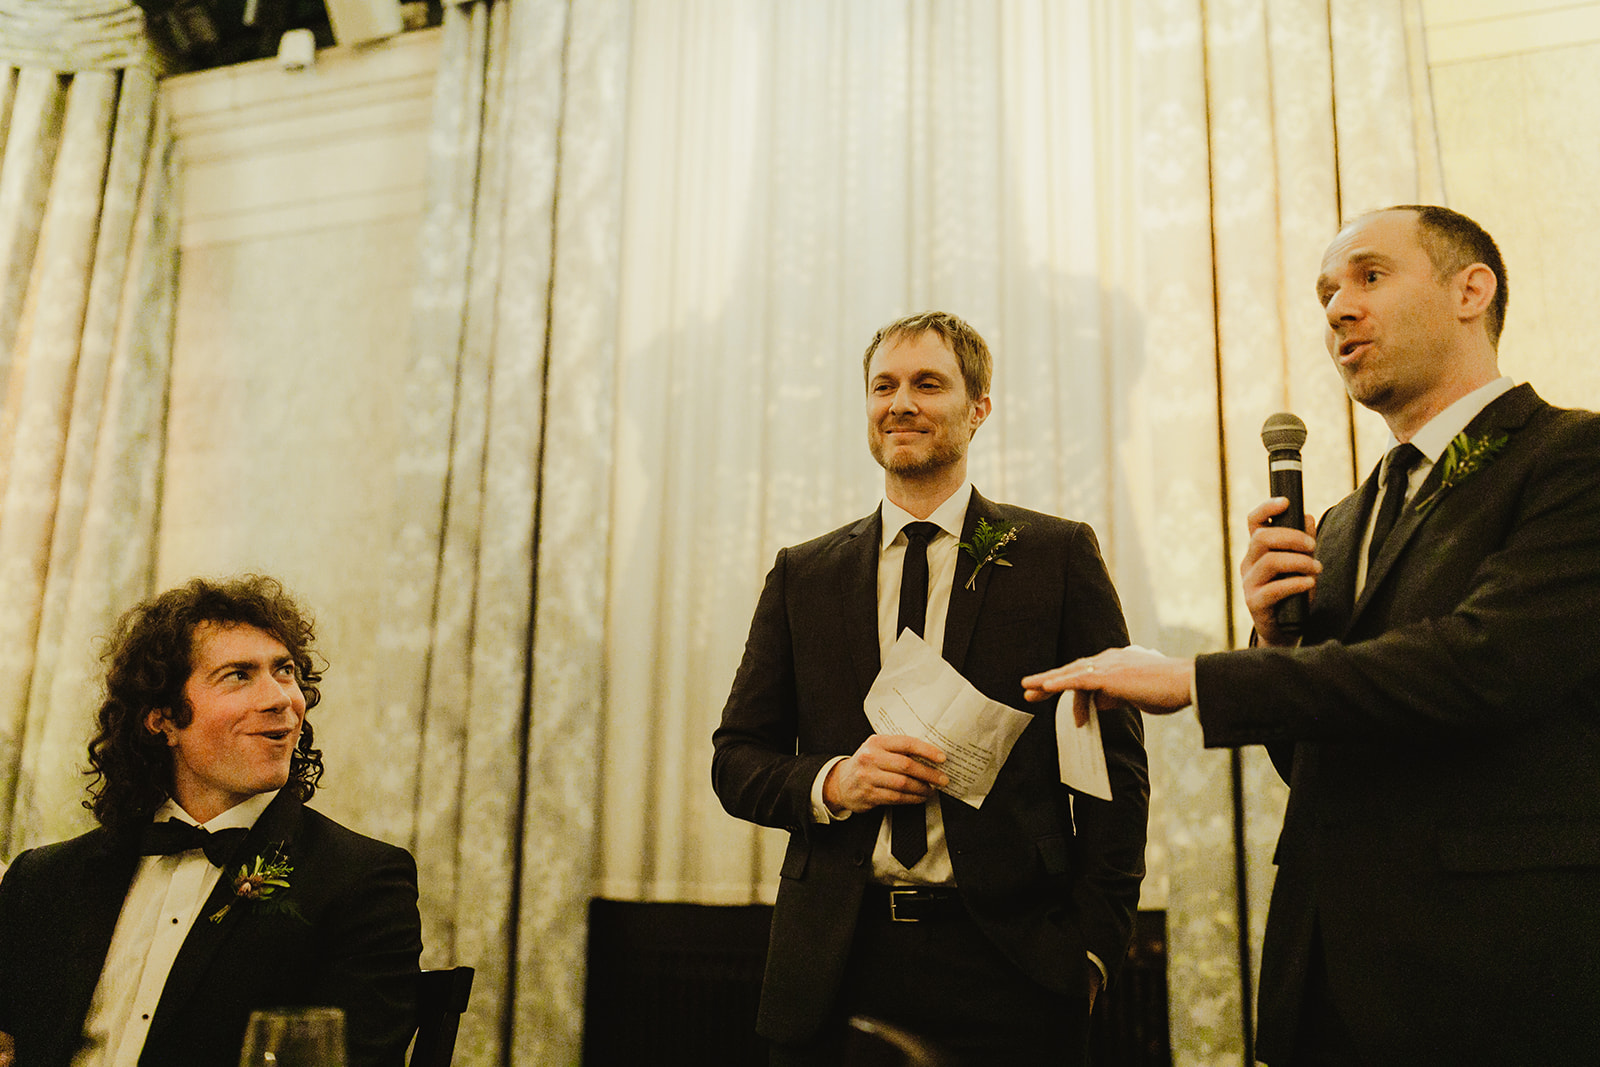 A groom and his best men sharing speeches during his wedding